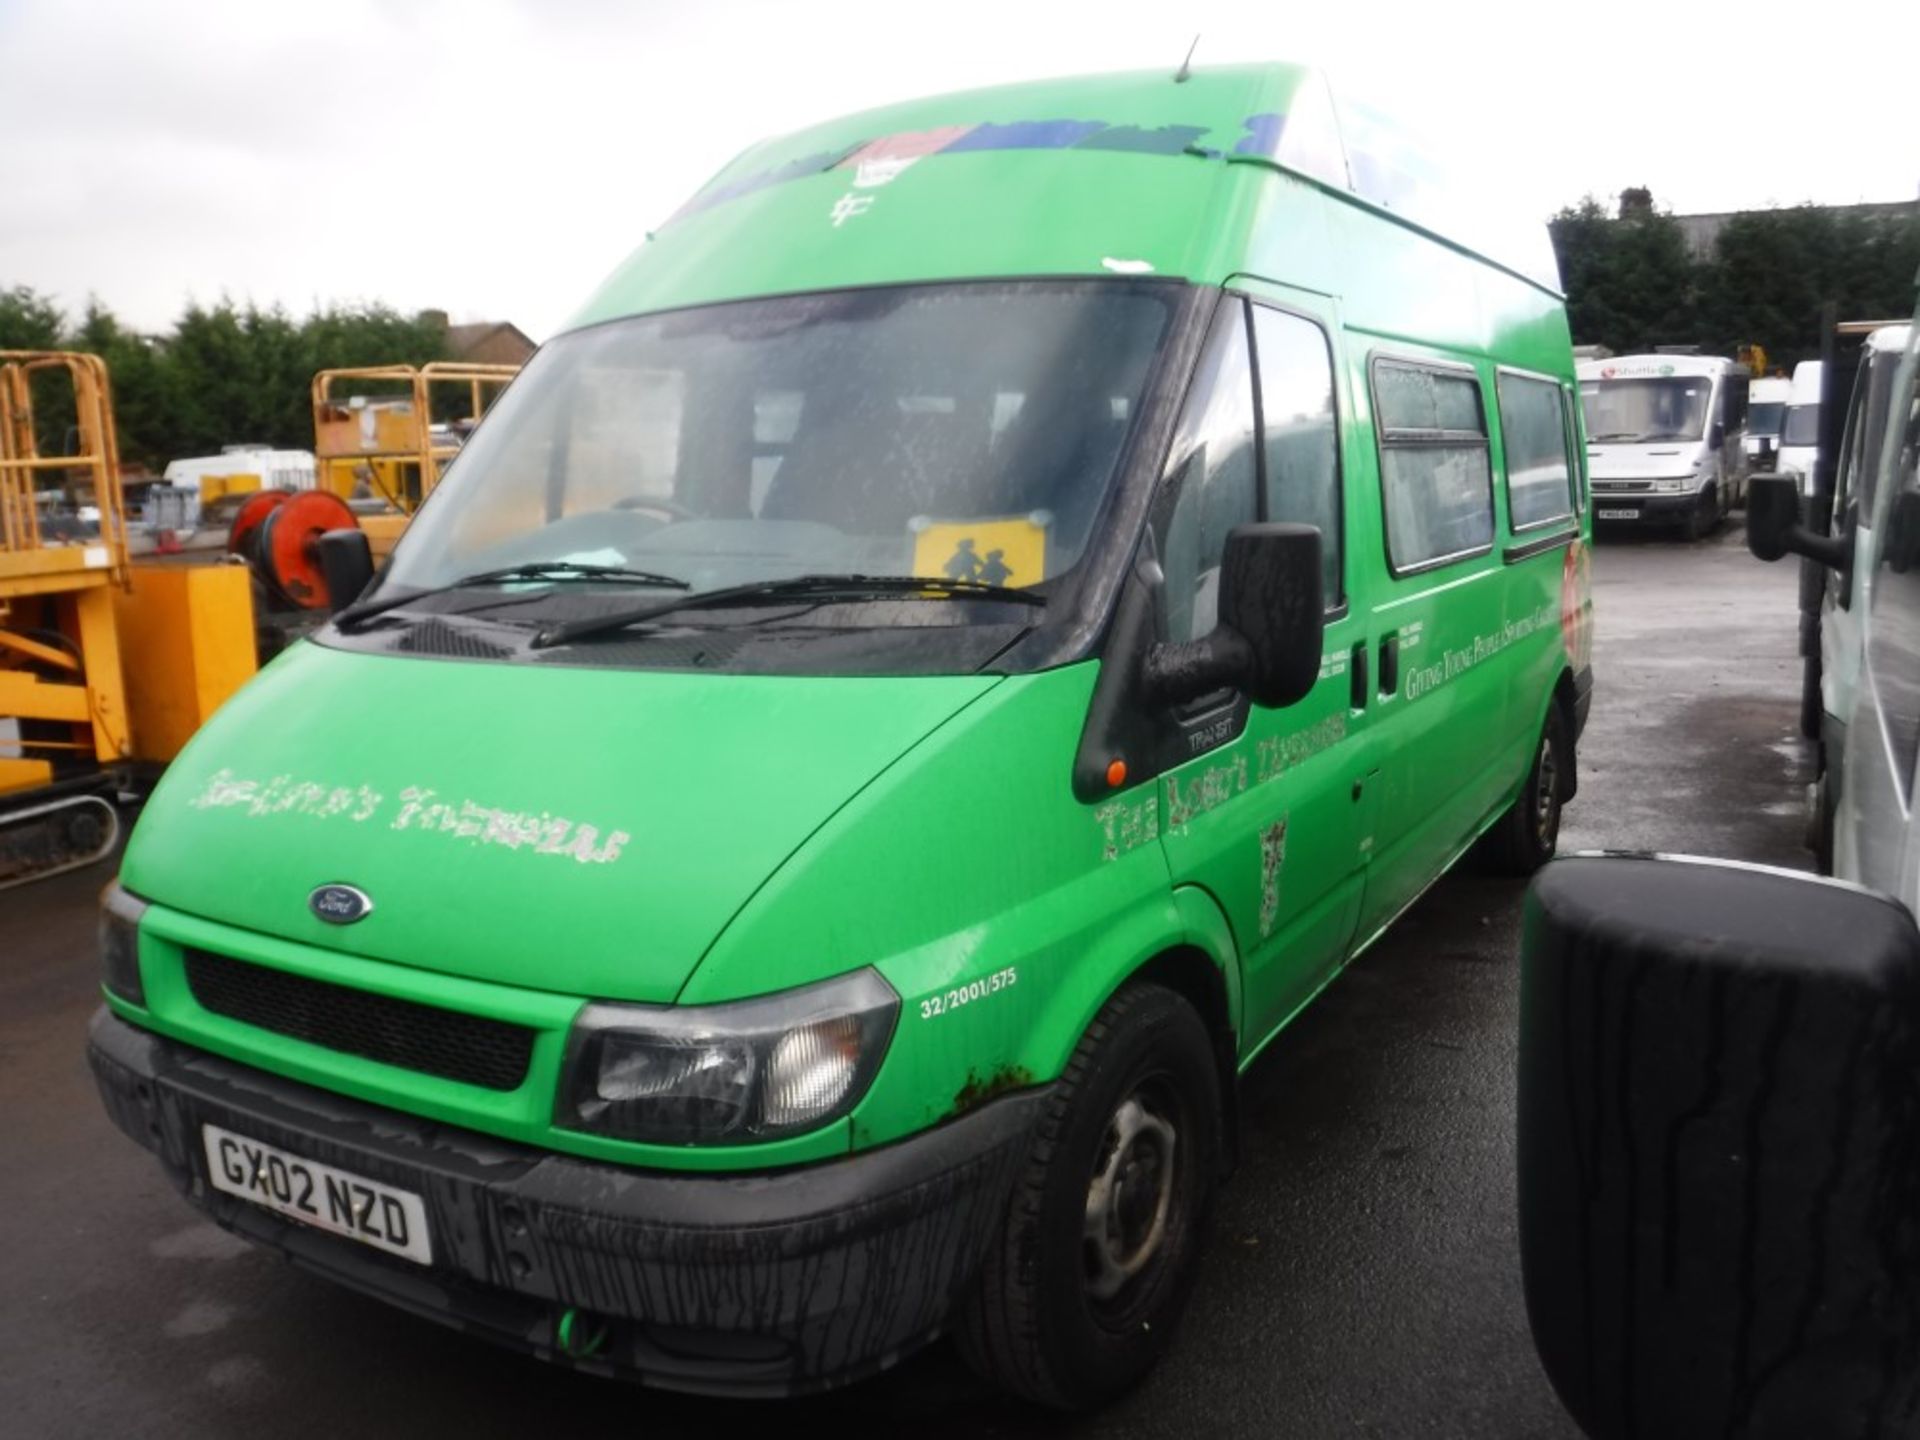 02 reg FORD TRANSIT 350 LWB DISABLED BUS WITH LIFT, 1ST REG 03/02, 216498M WARRANTED, V5 HERE, 1 - Image 2 of 6